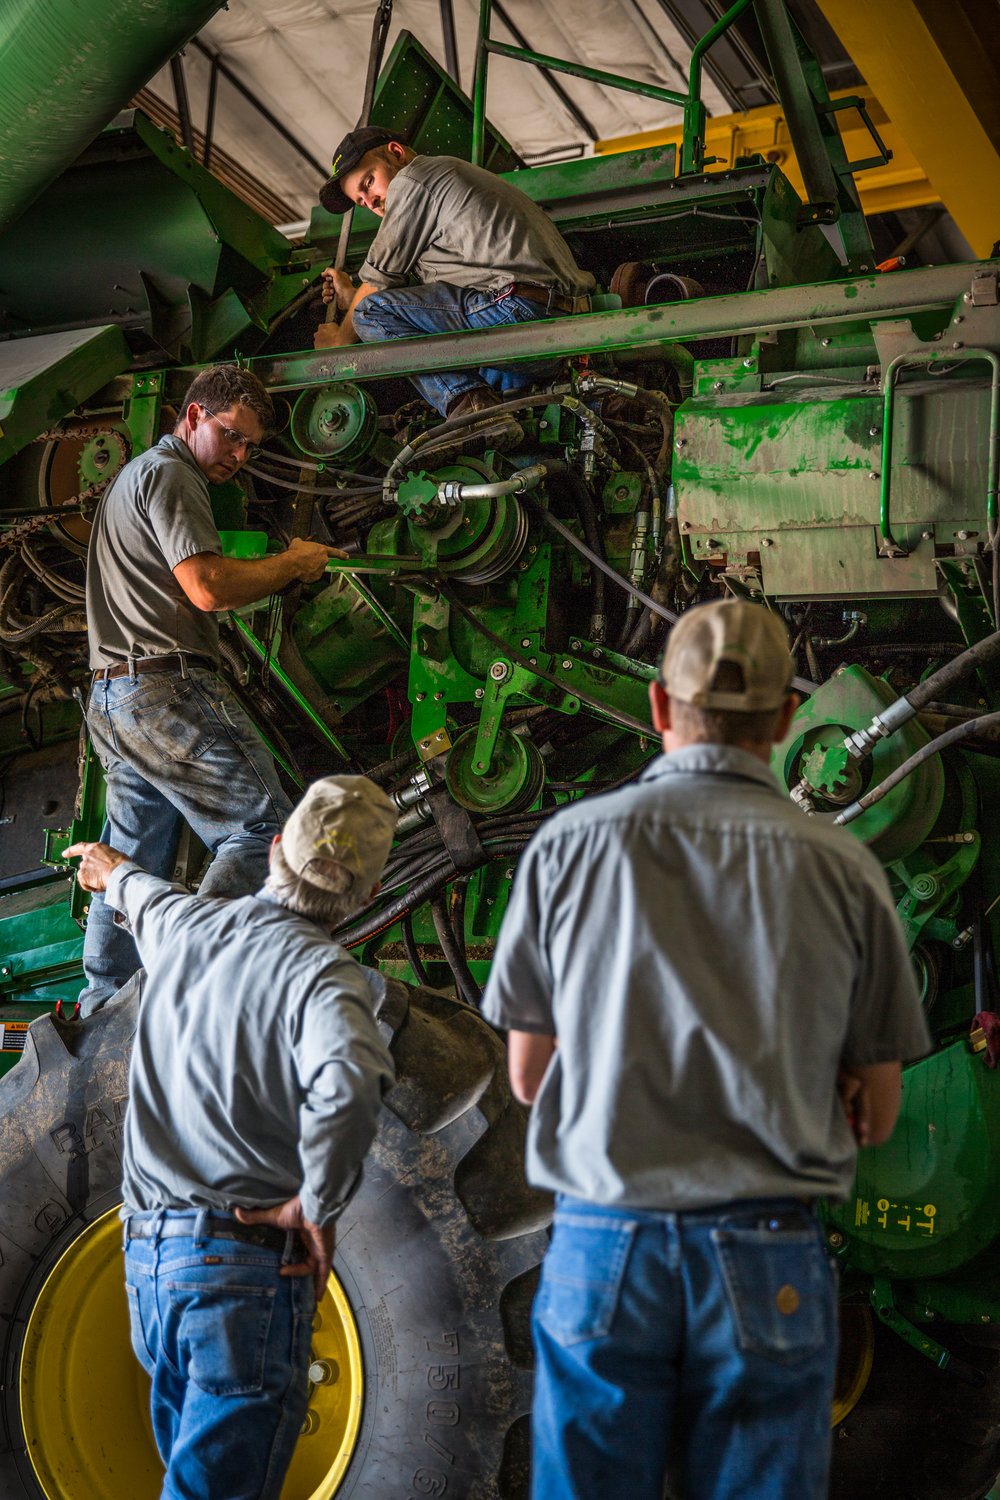  Service technicians work on repairing a combine in the Sydenstricker John Deere dealership in Mexico, Missouri on Tuesday, Oct. 4, 2016.  